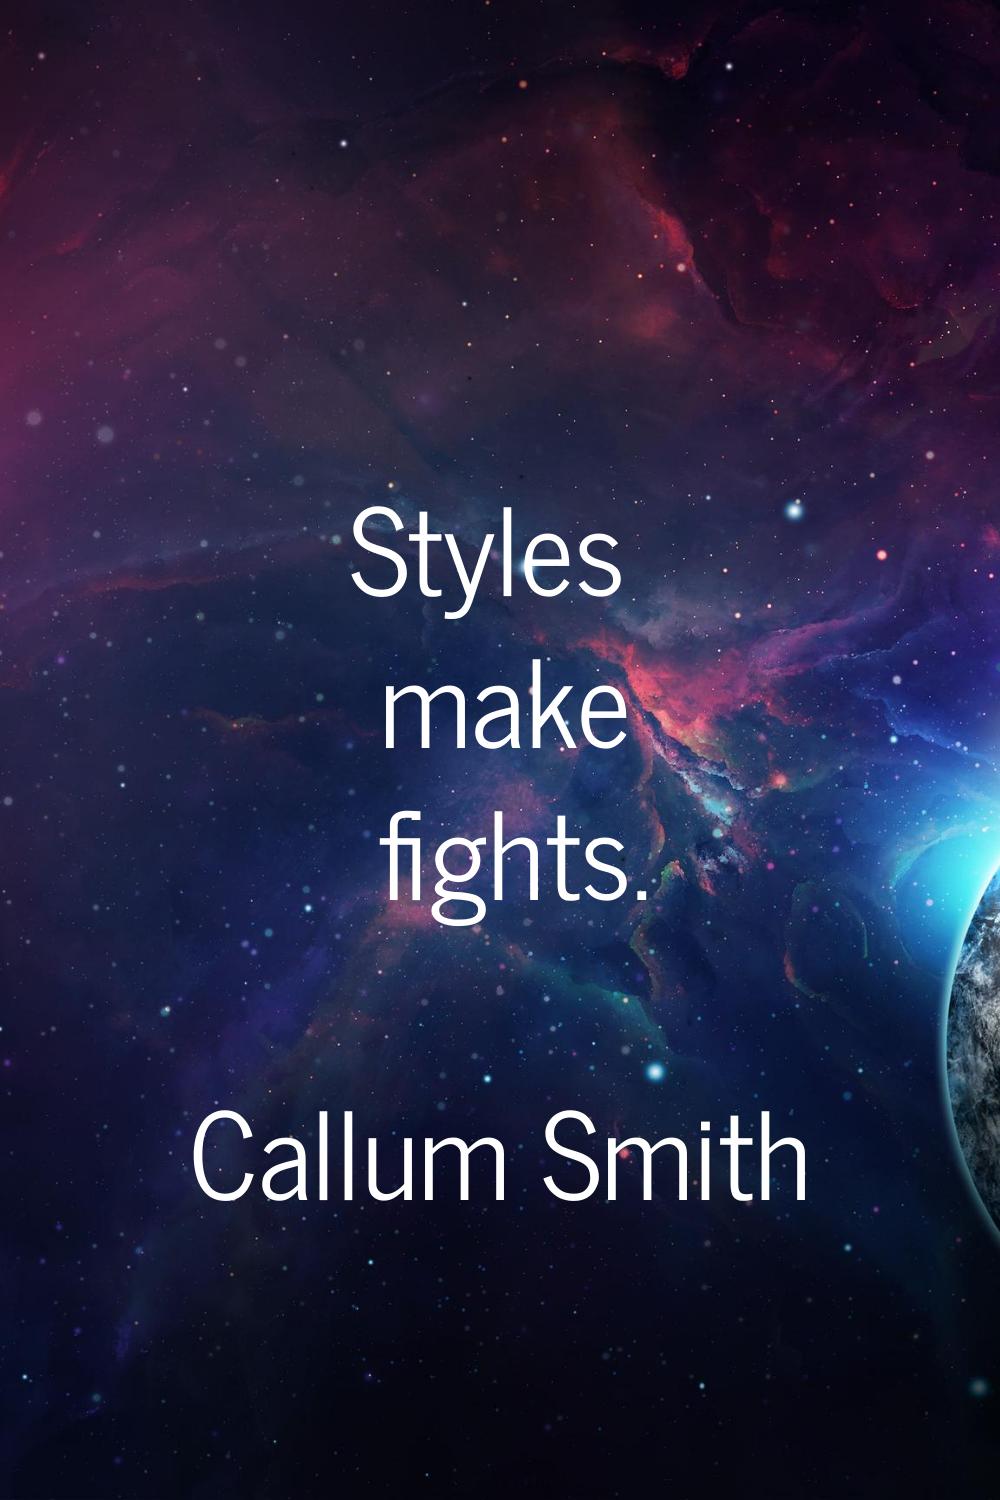 Styles make fights.